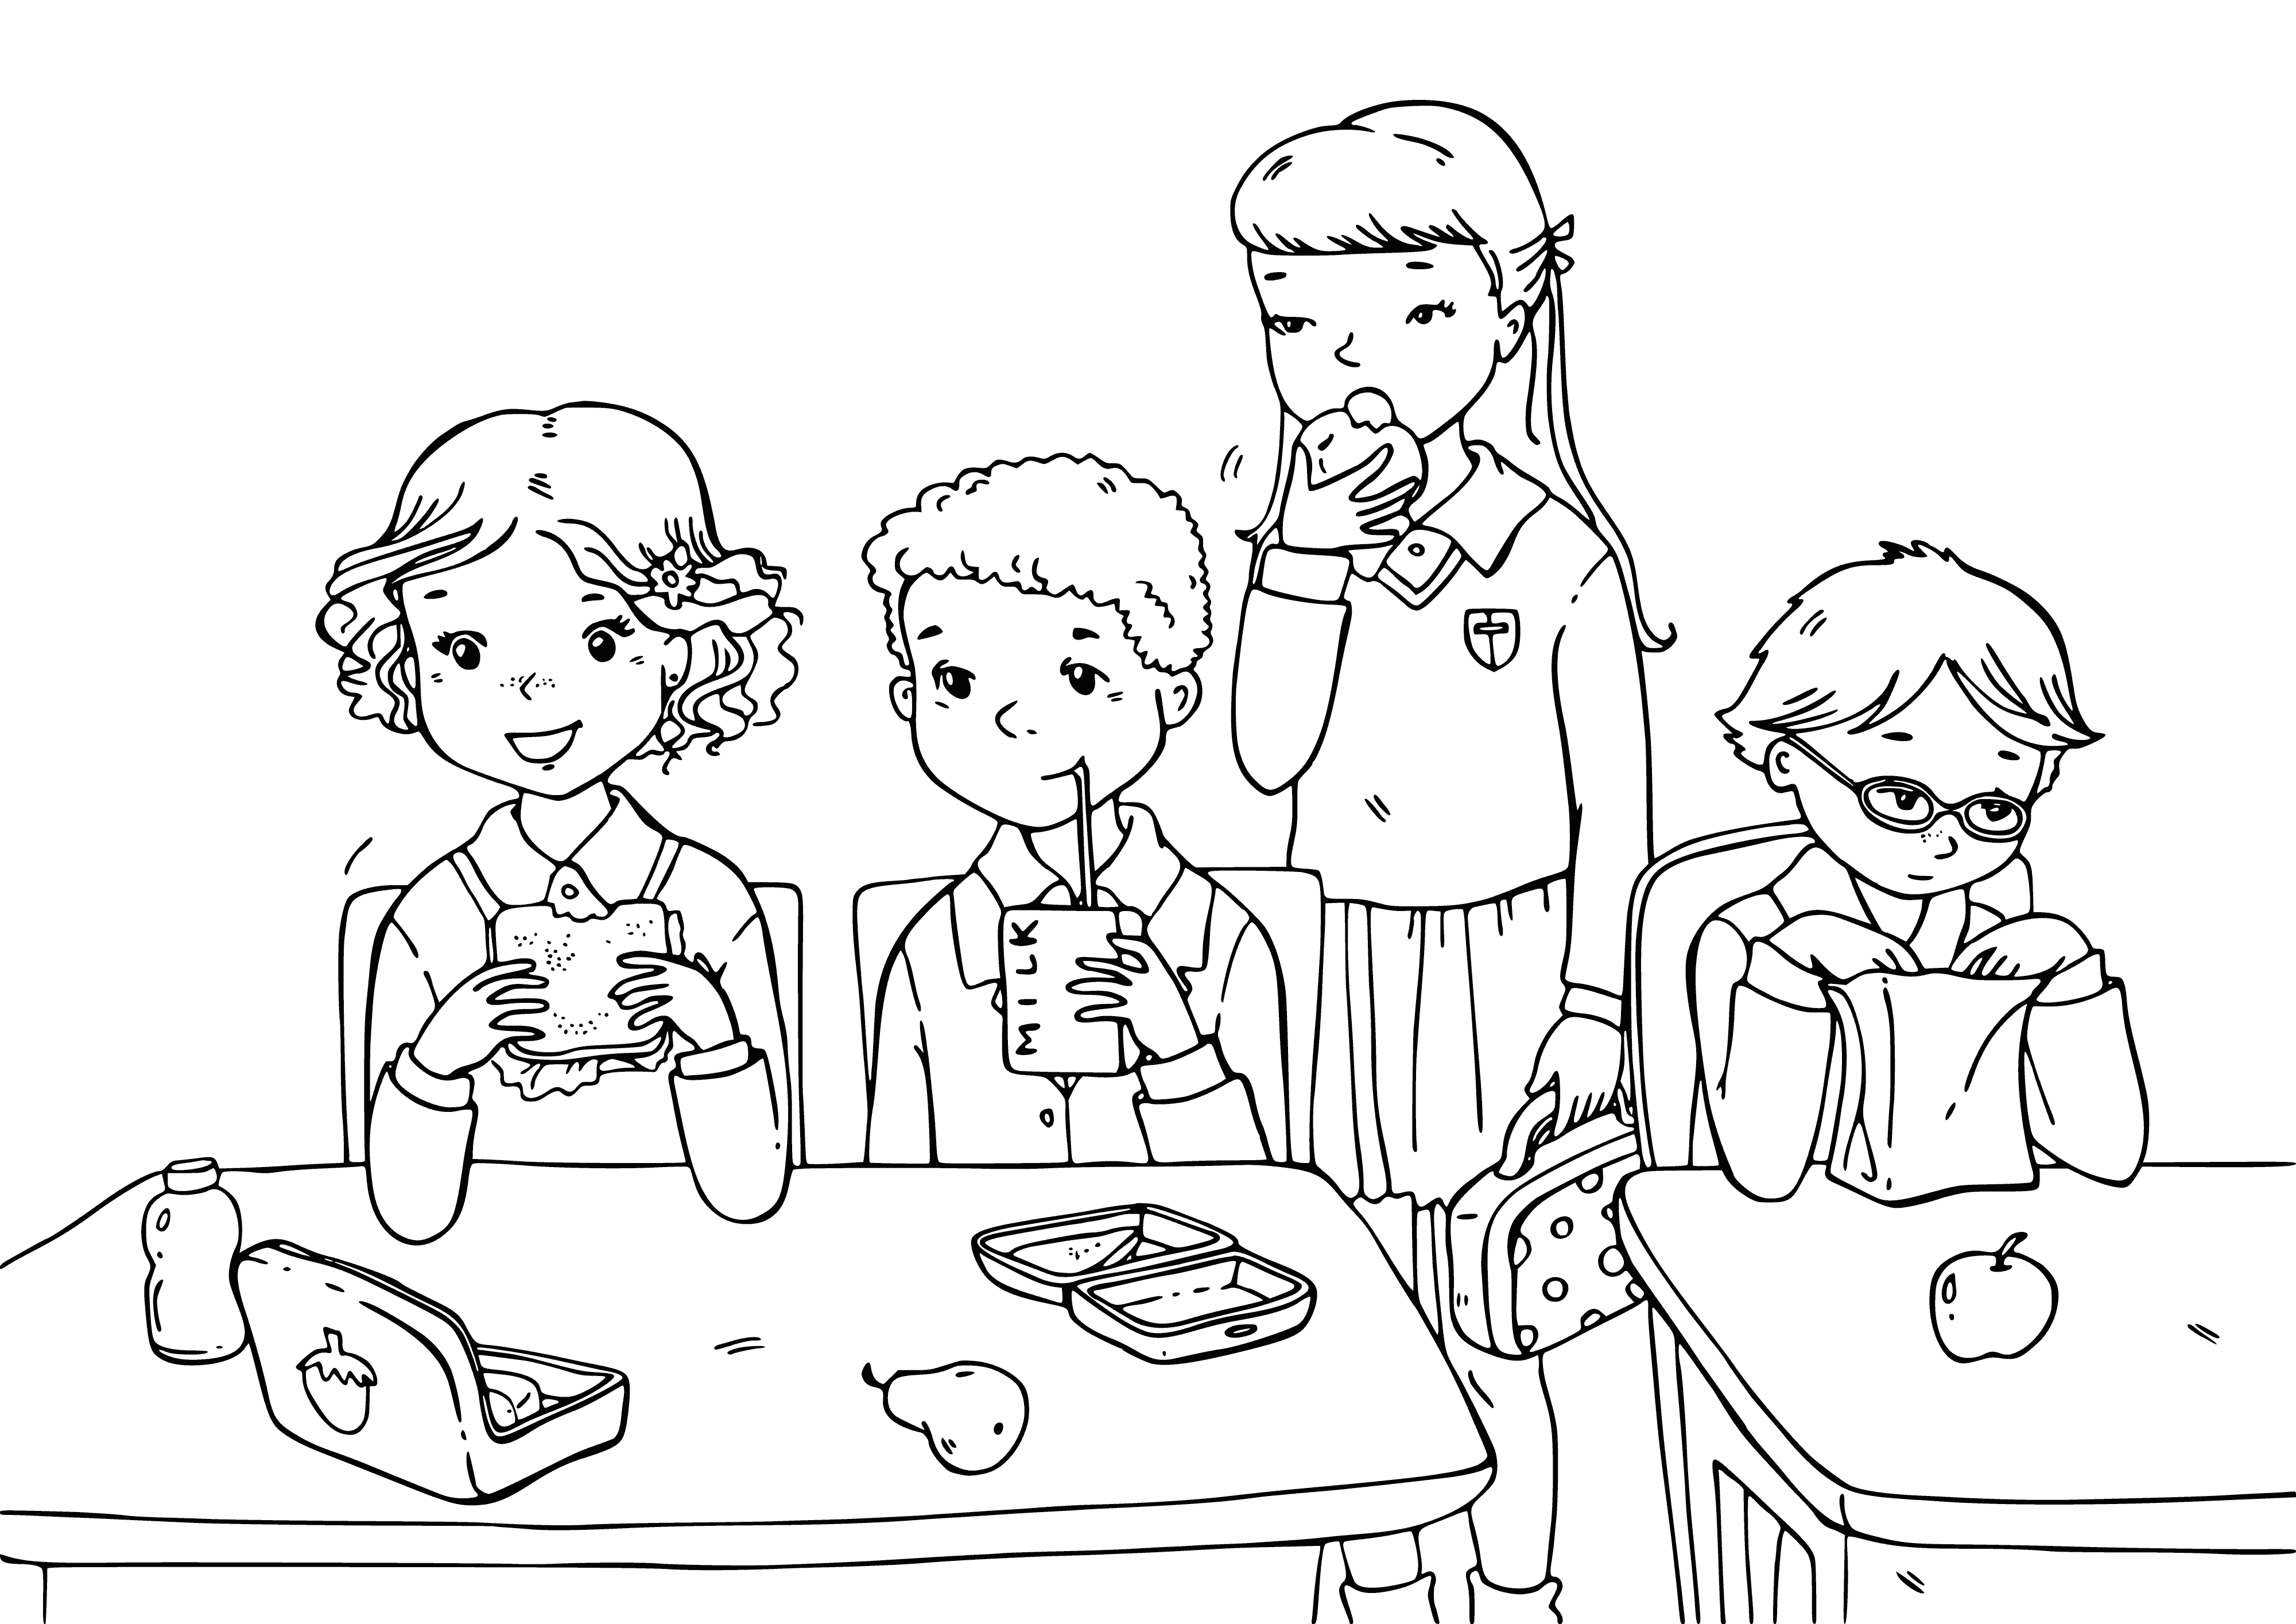 coloring page: 3 children eating breakfast, watching each other in a room filled with school supplies.